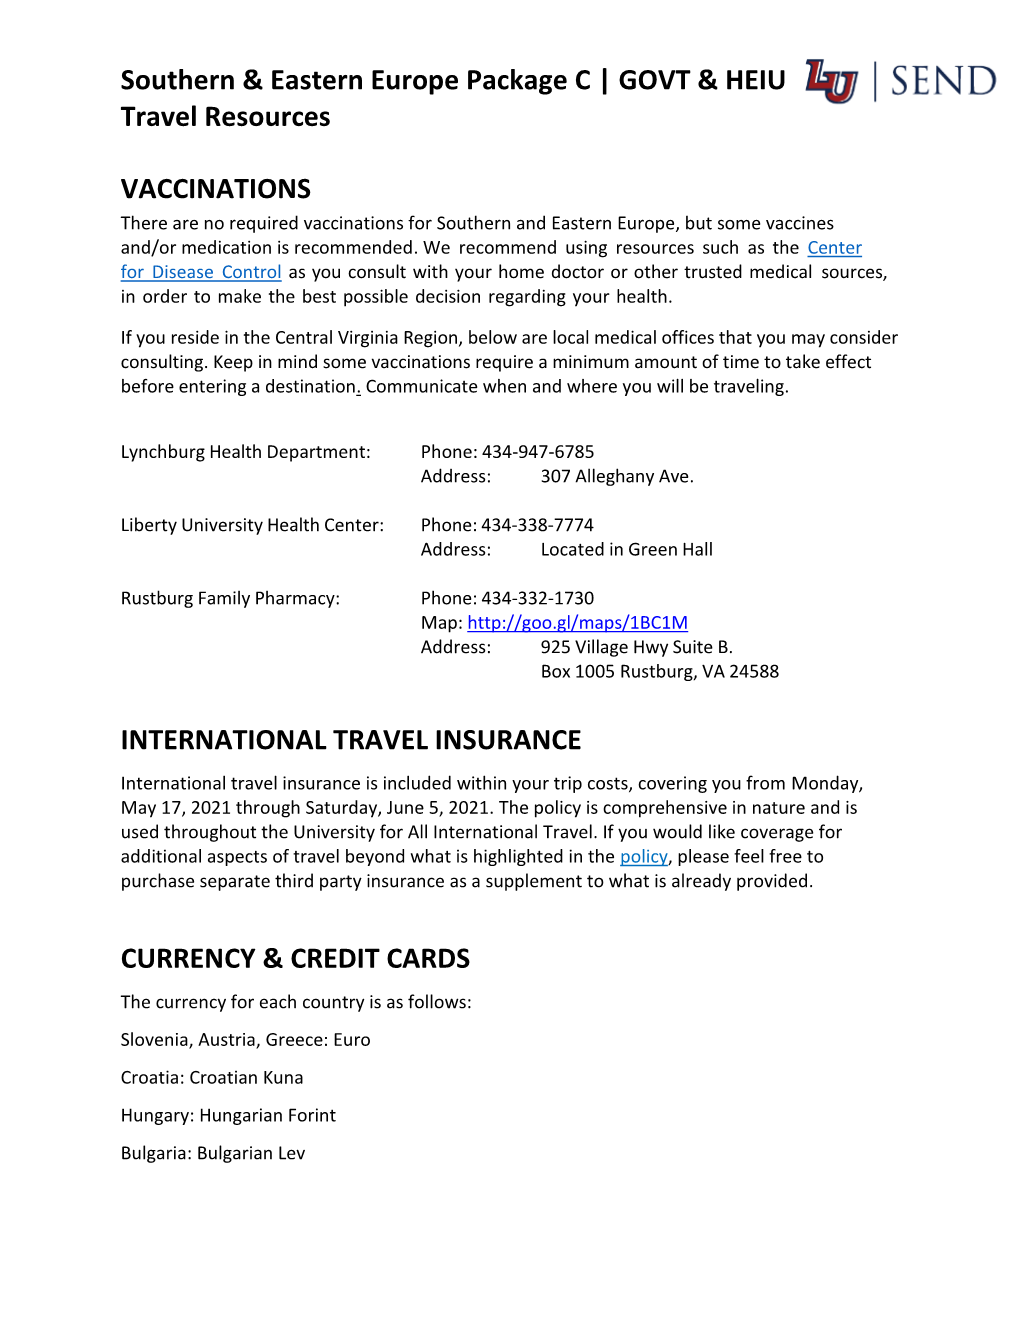 Southern & Eastern Europe Package C | GOVT & HEIU Travel Resources VACCINATIONS INTERNATIONAL TRAVEL INSURANCE CURRENCY